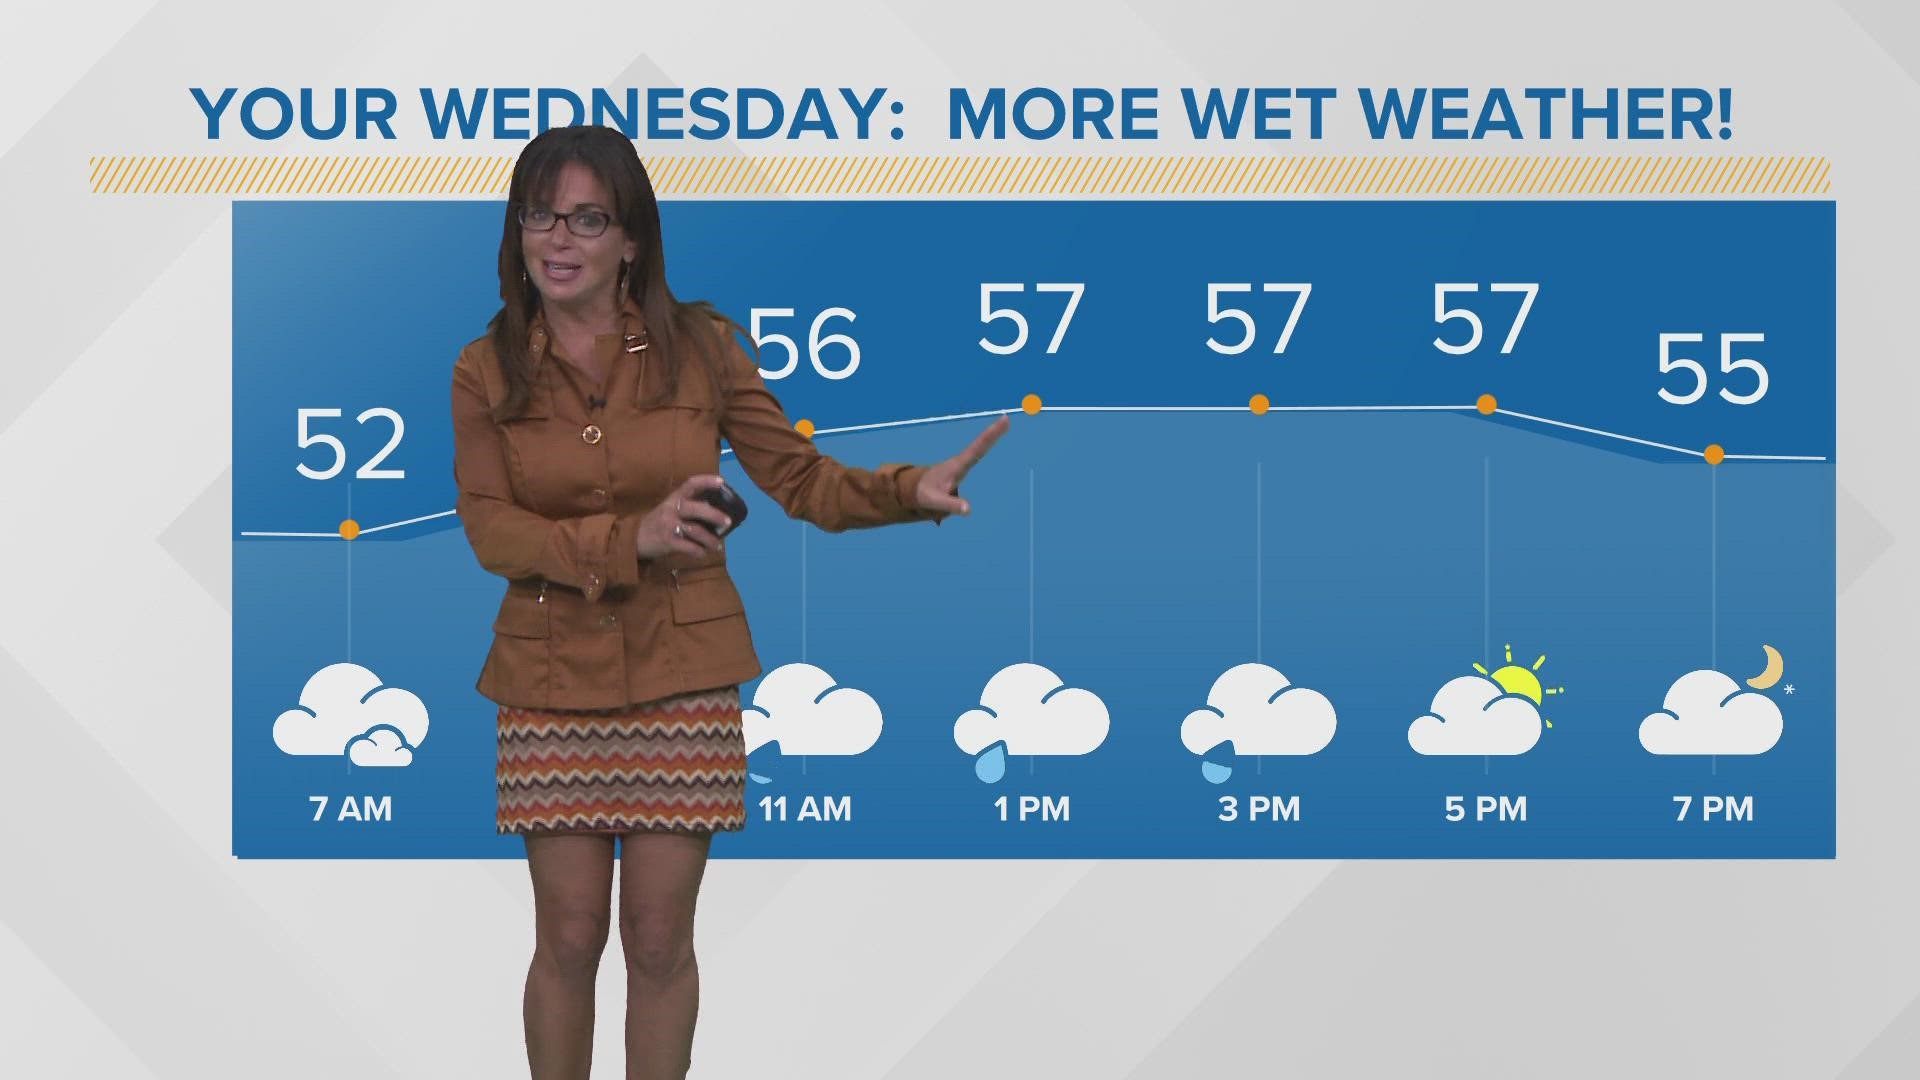 More scattered rain and cool temperatures today. 3News' Hollie Strano has the hour-by-hour details in her morning weather forecast for Wednesday, September 28, 2022.